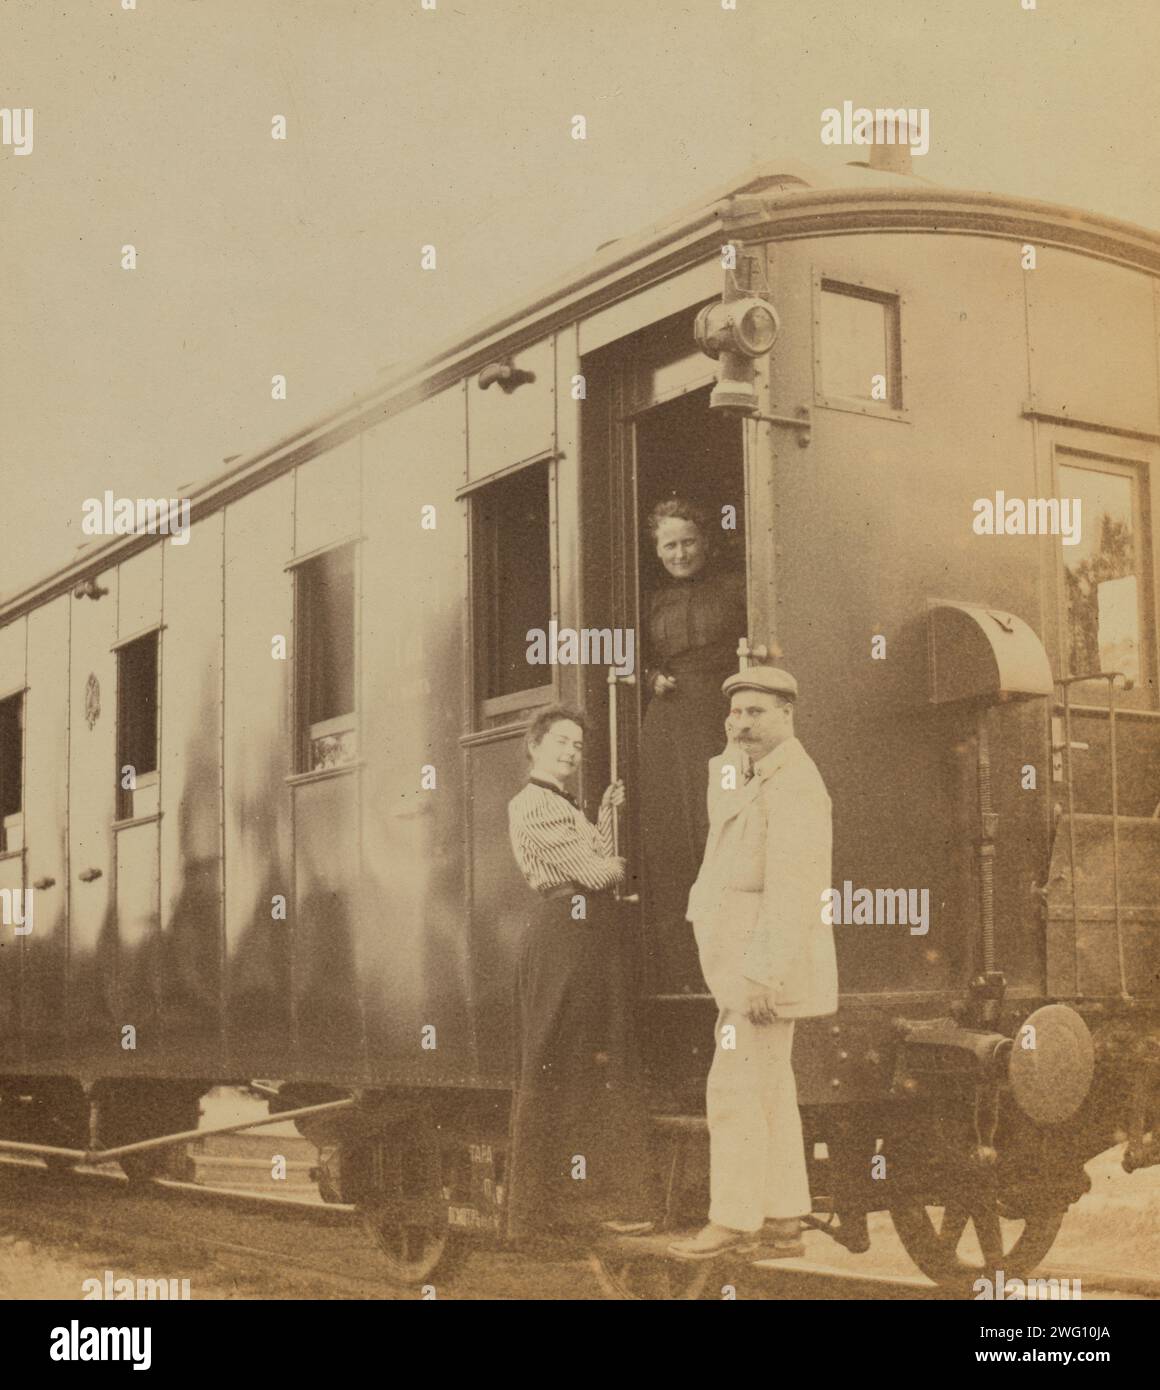 Eleanor Pray and Sarah Smith posed with their friend Mr Hunt at a Trans-Siberian railroad car on the Ussuri line, which runs north from Vladivostok to Khabarovsk, Russia, 1899. In: Photograph album of Pray family expatriate life in Vladivostok, Russia. Stock Photo